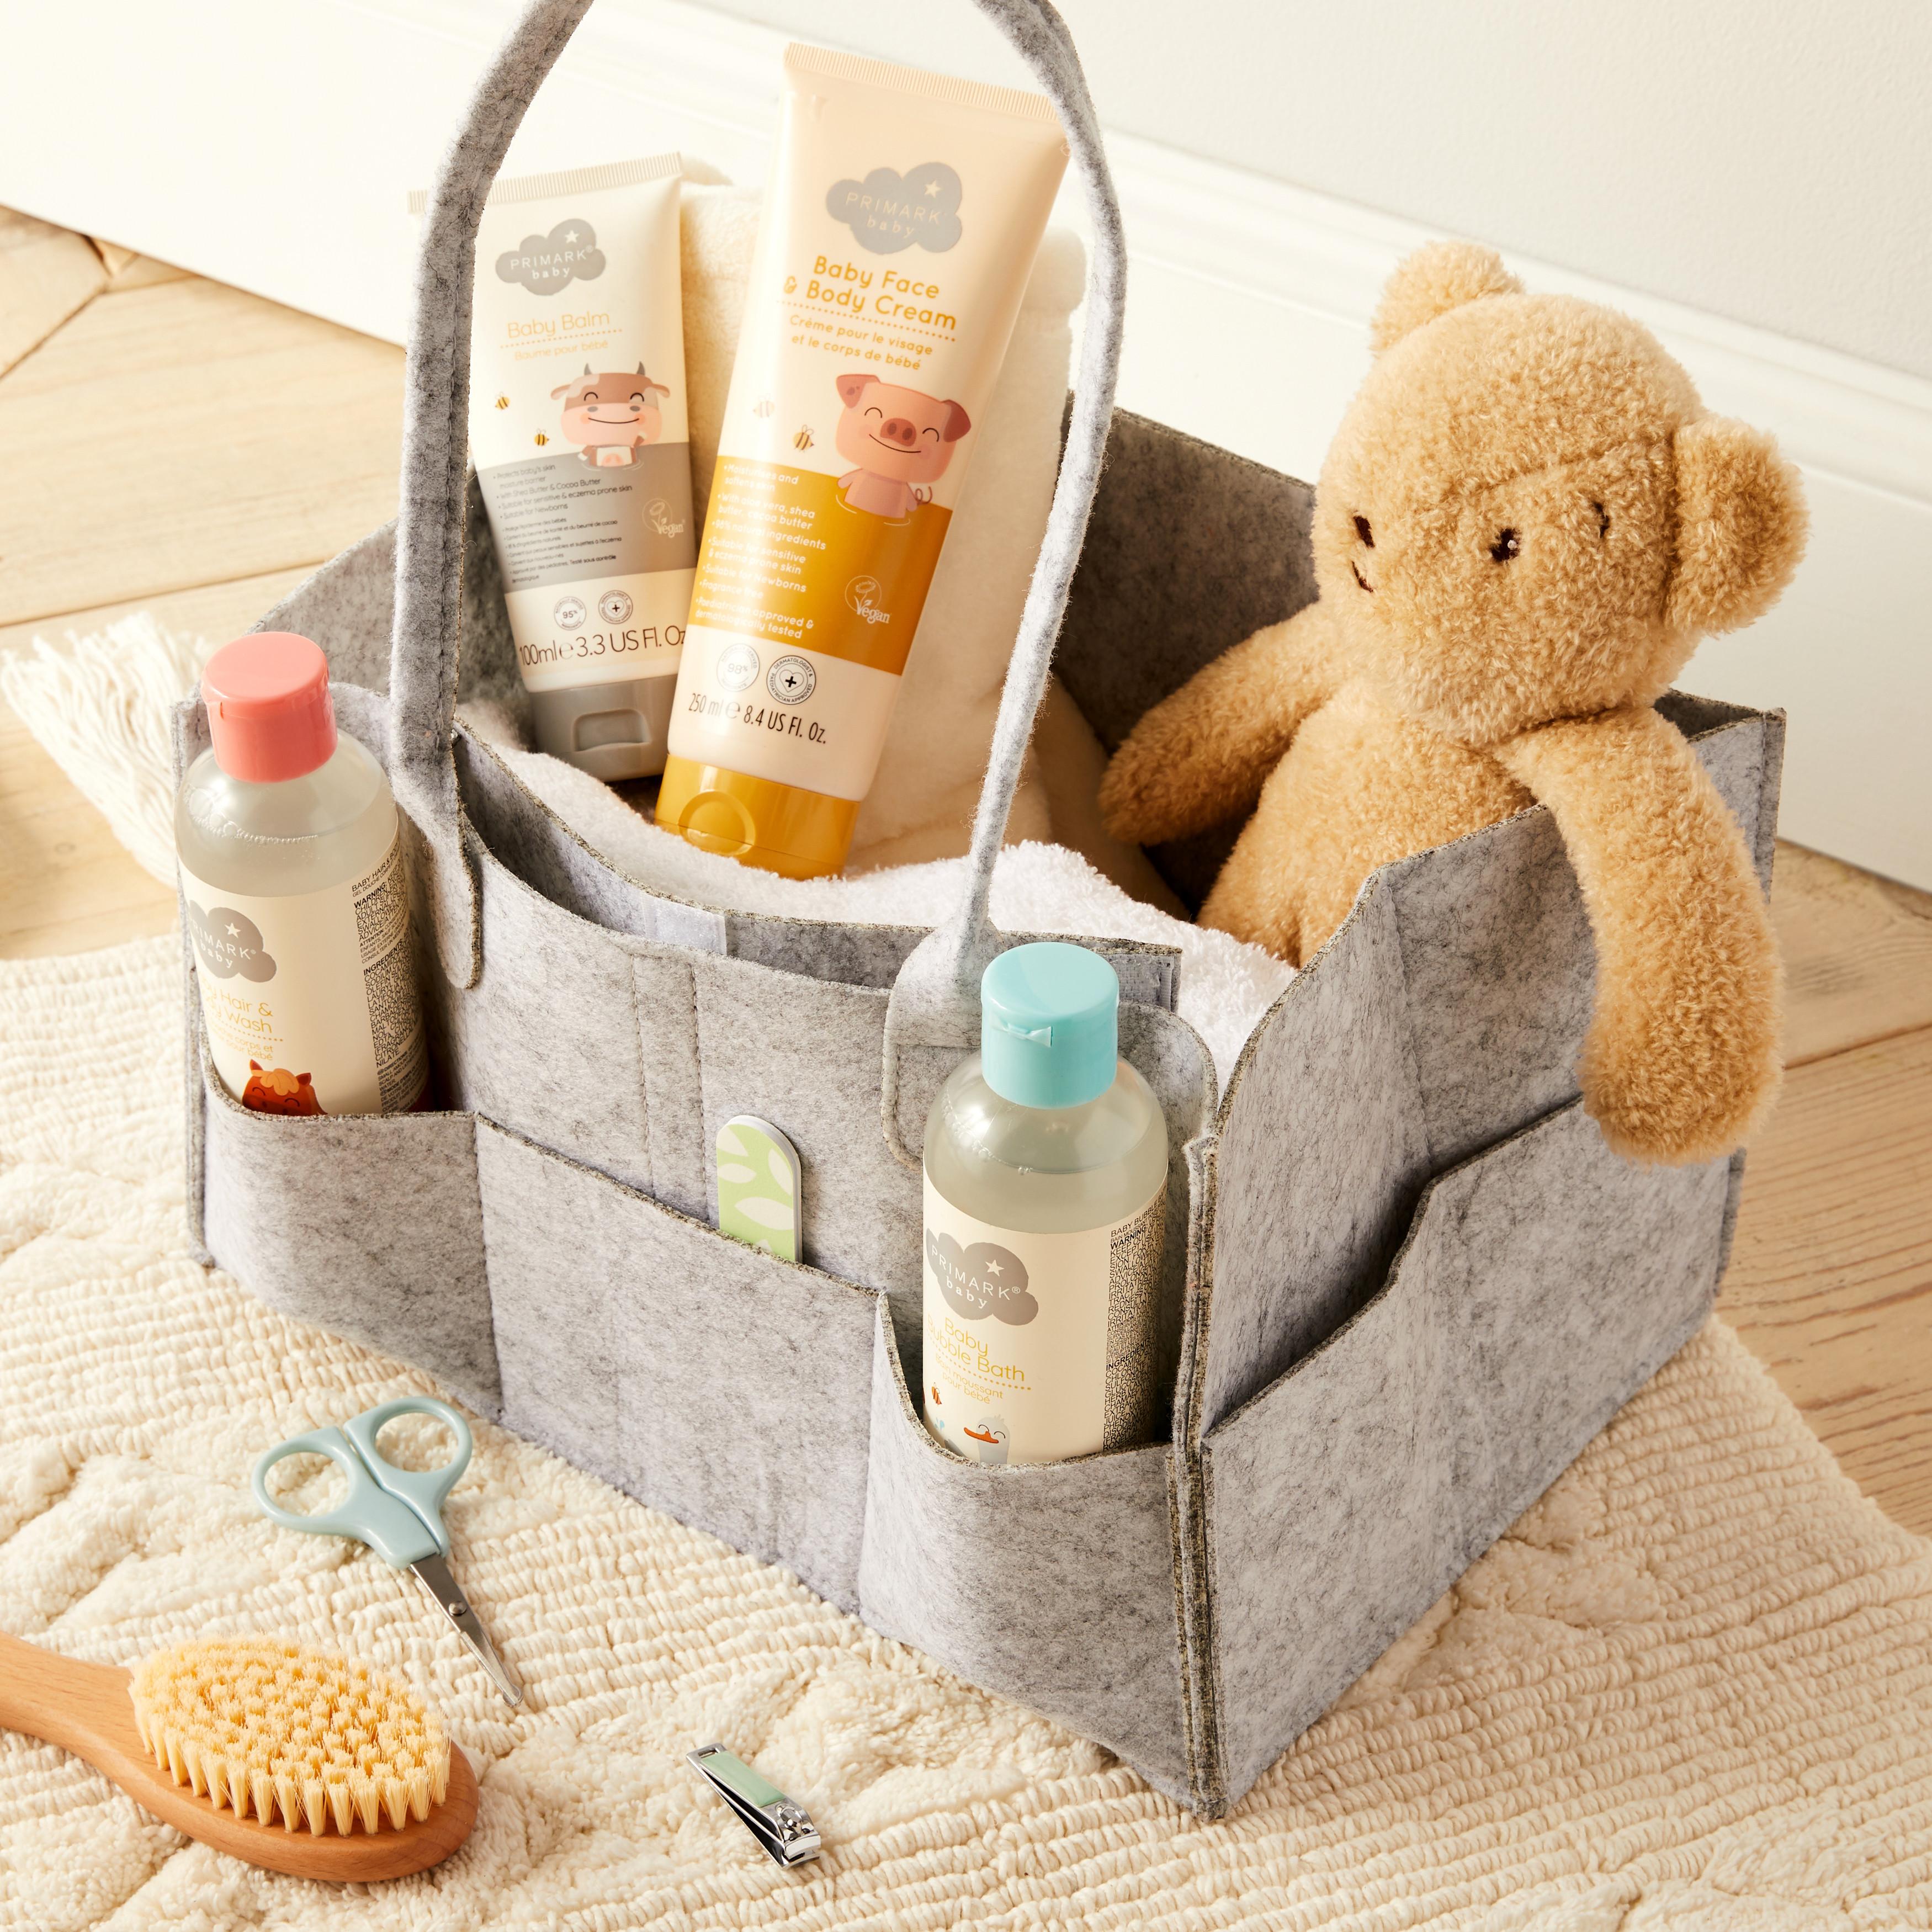 Grey Basket containing Primark Baby products and teddy bear